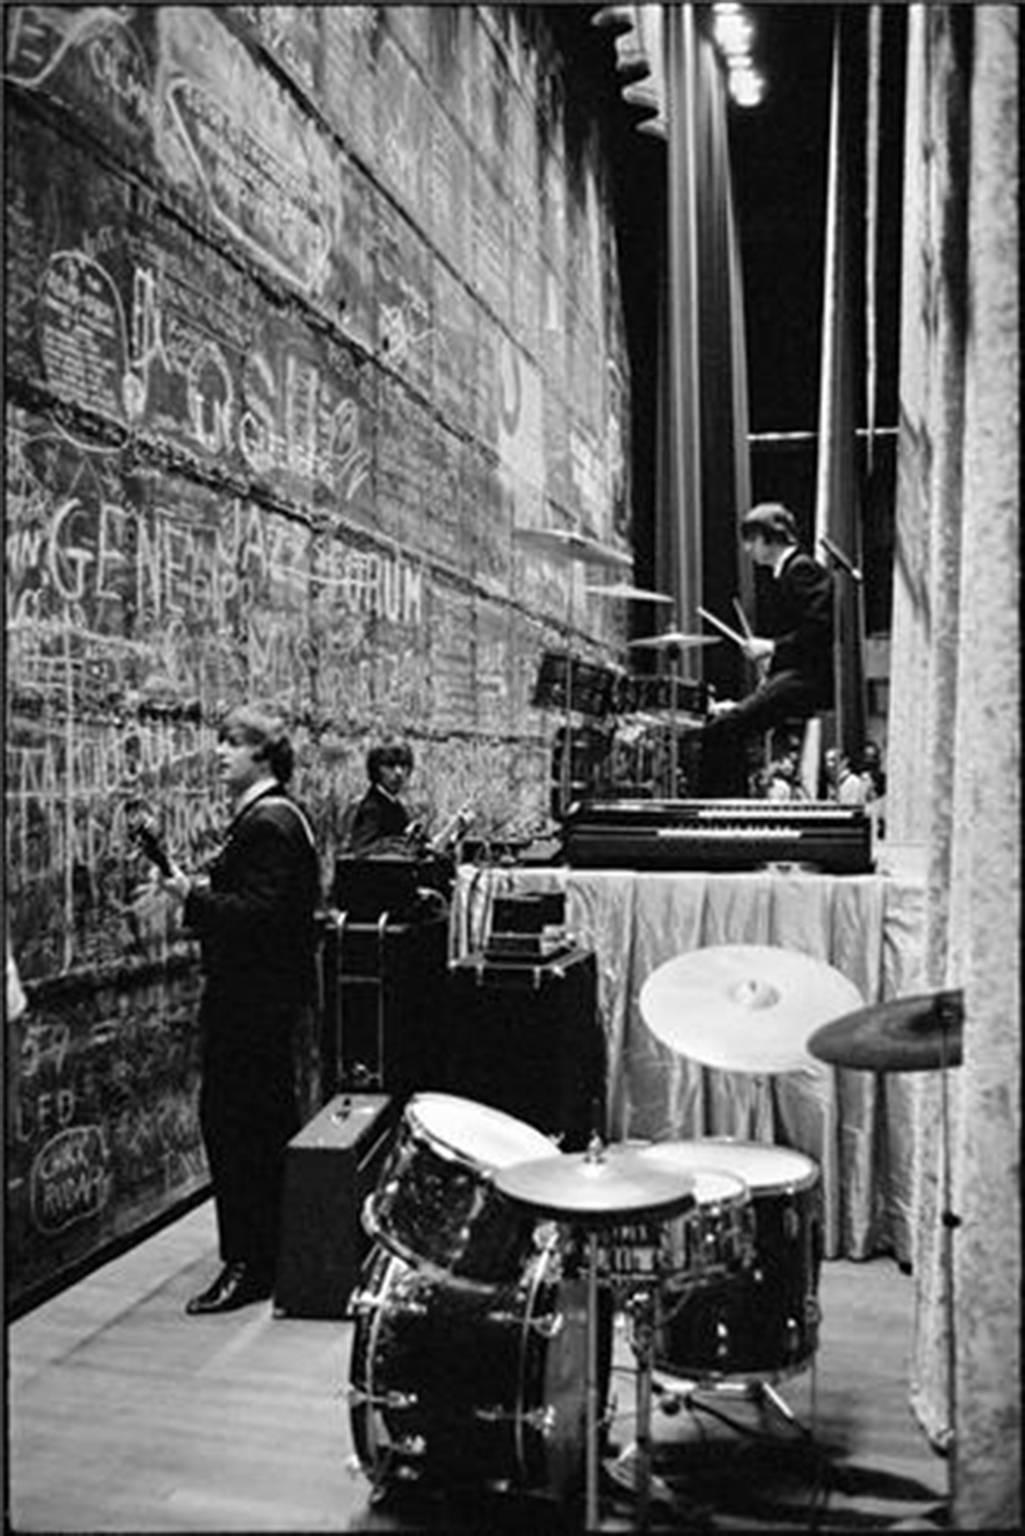 Curt Gunther Black and White Photograph - The Beatles Backstage